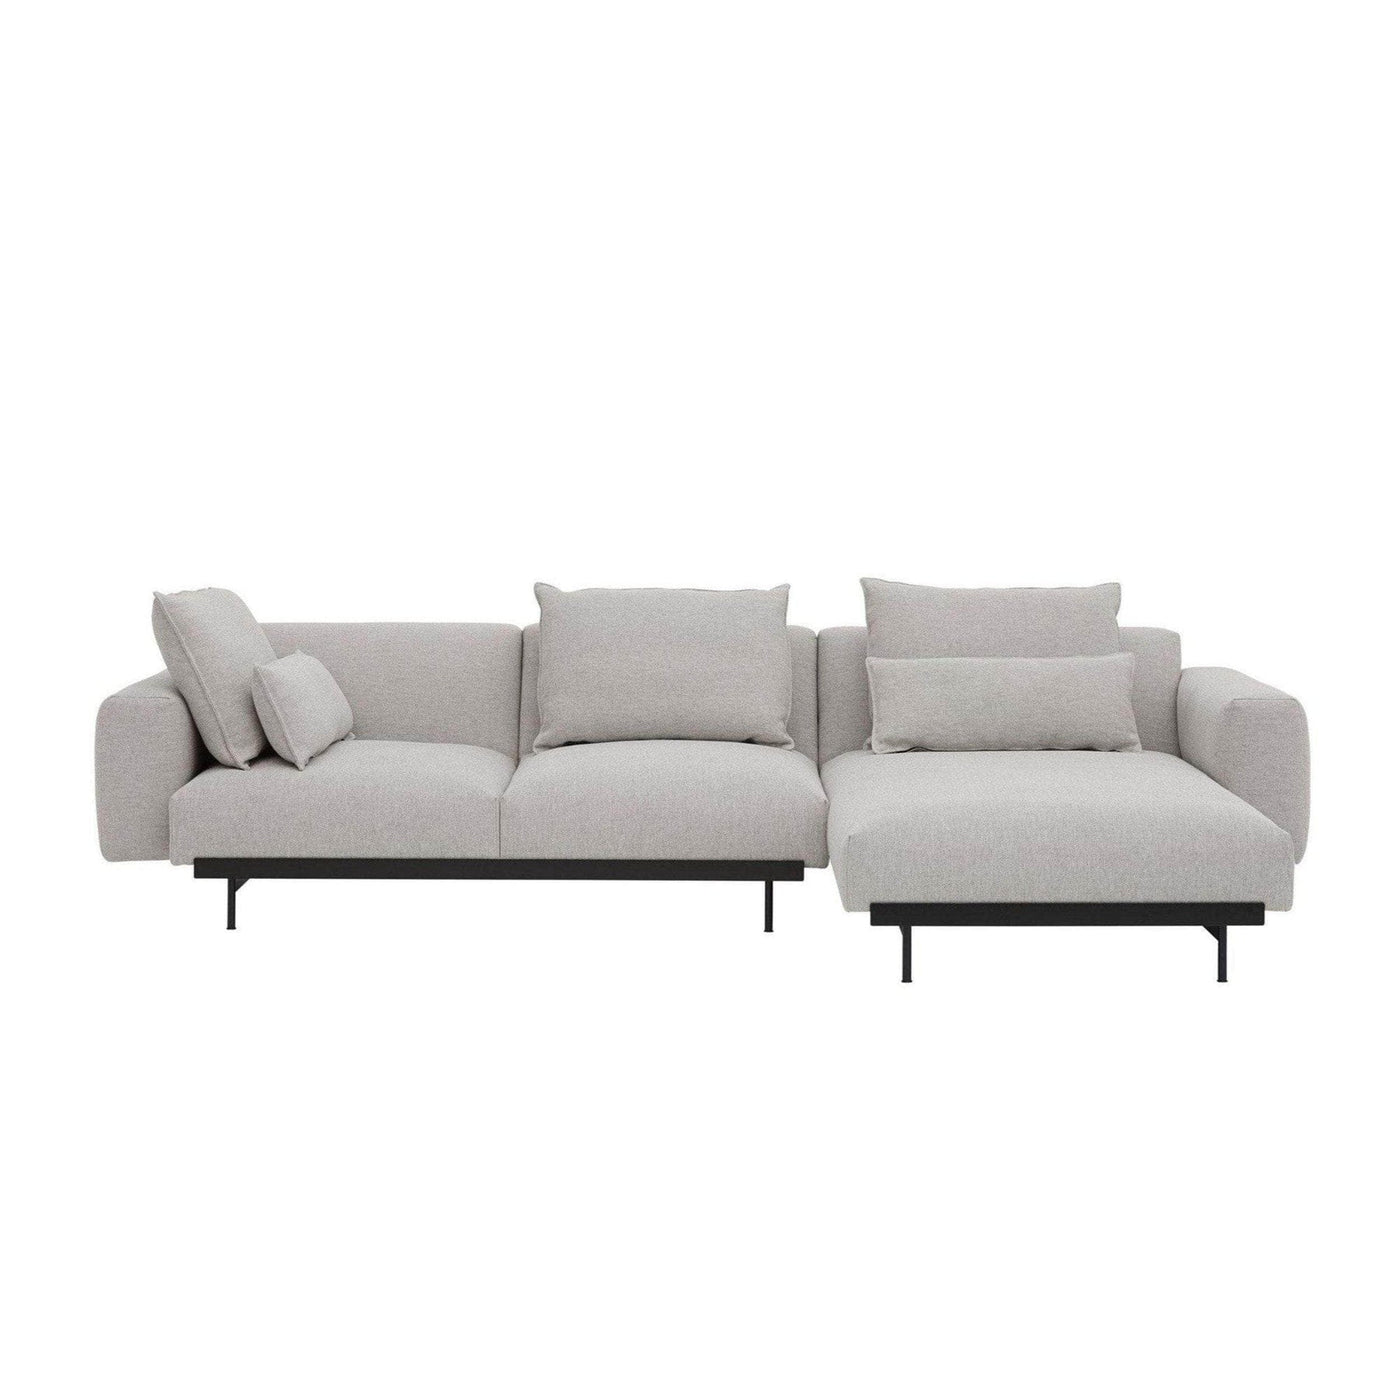 Muuto In Situ Sofa 3 seater configuration 6 in clay 12 fabric. Made to order at someday designs. #colour_clay-12